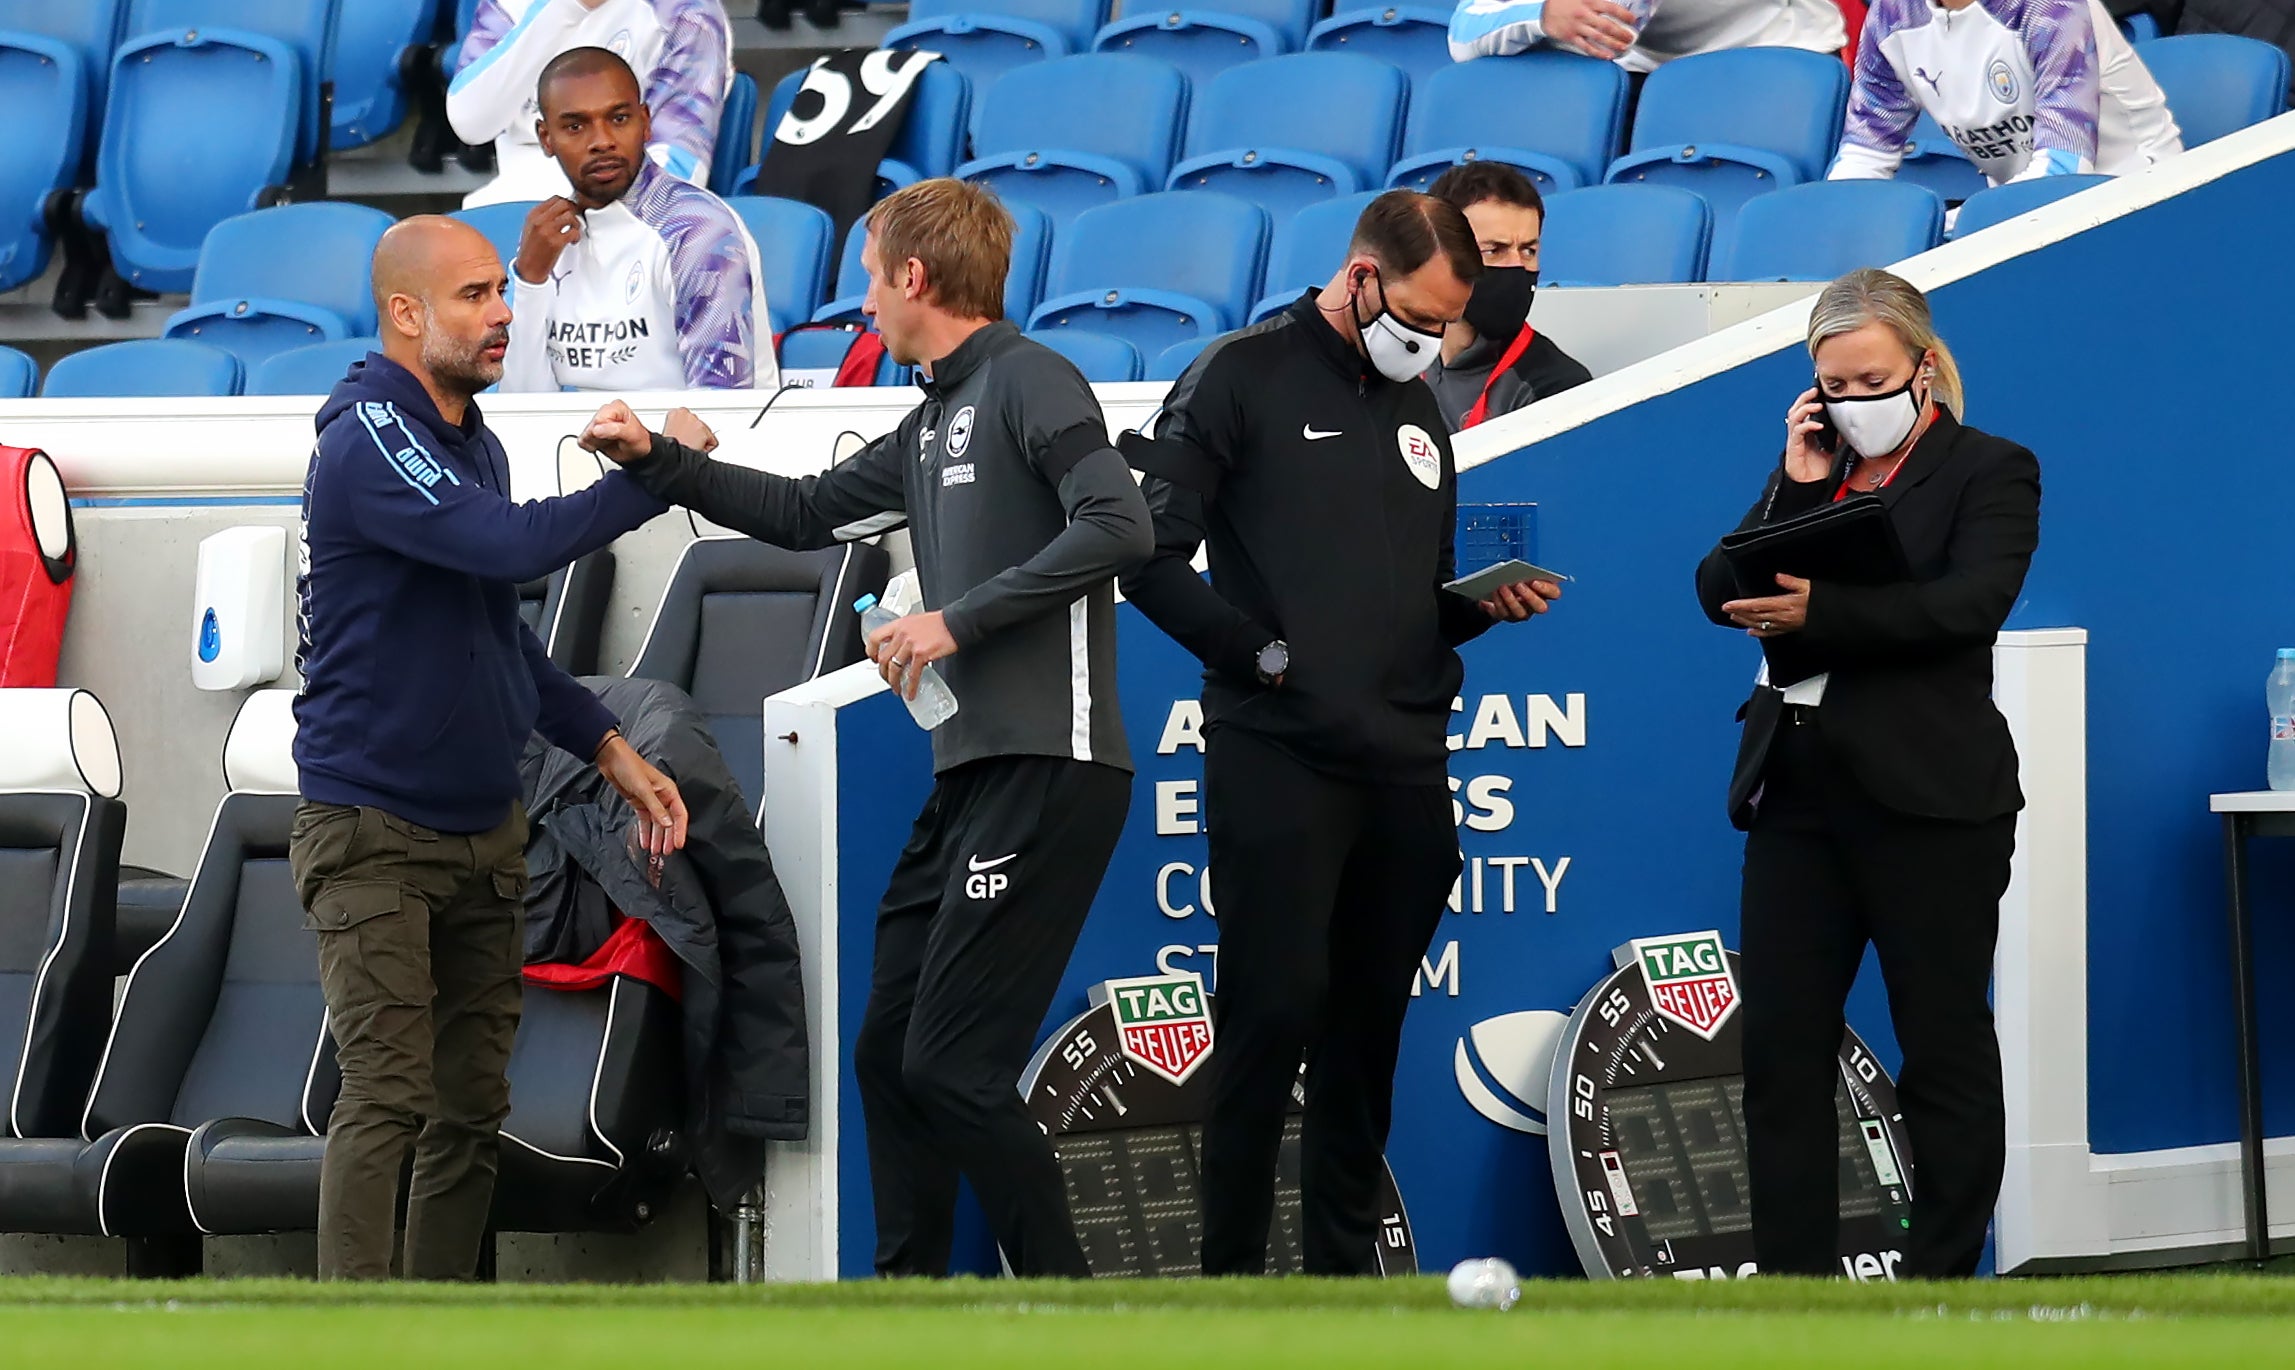 Pep Guardiola has promised Graham Potter a handshake before and after Saturday’s match (Catherine Ivill/NMC Pool/PA)